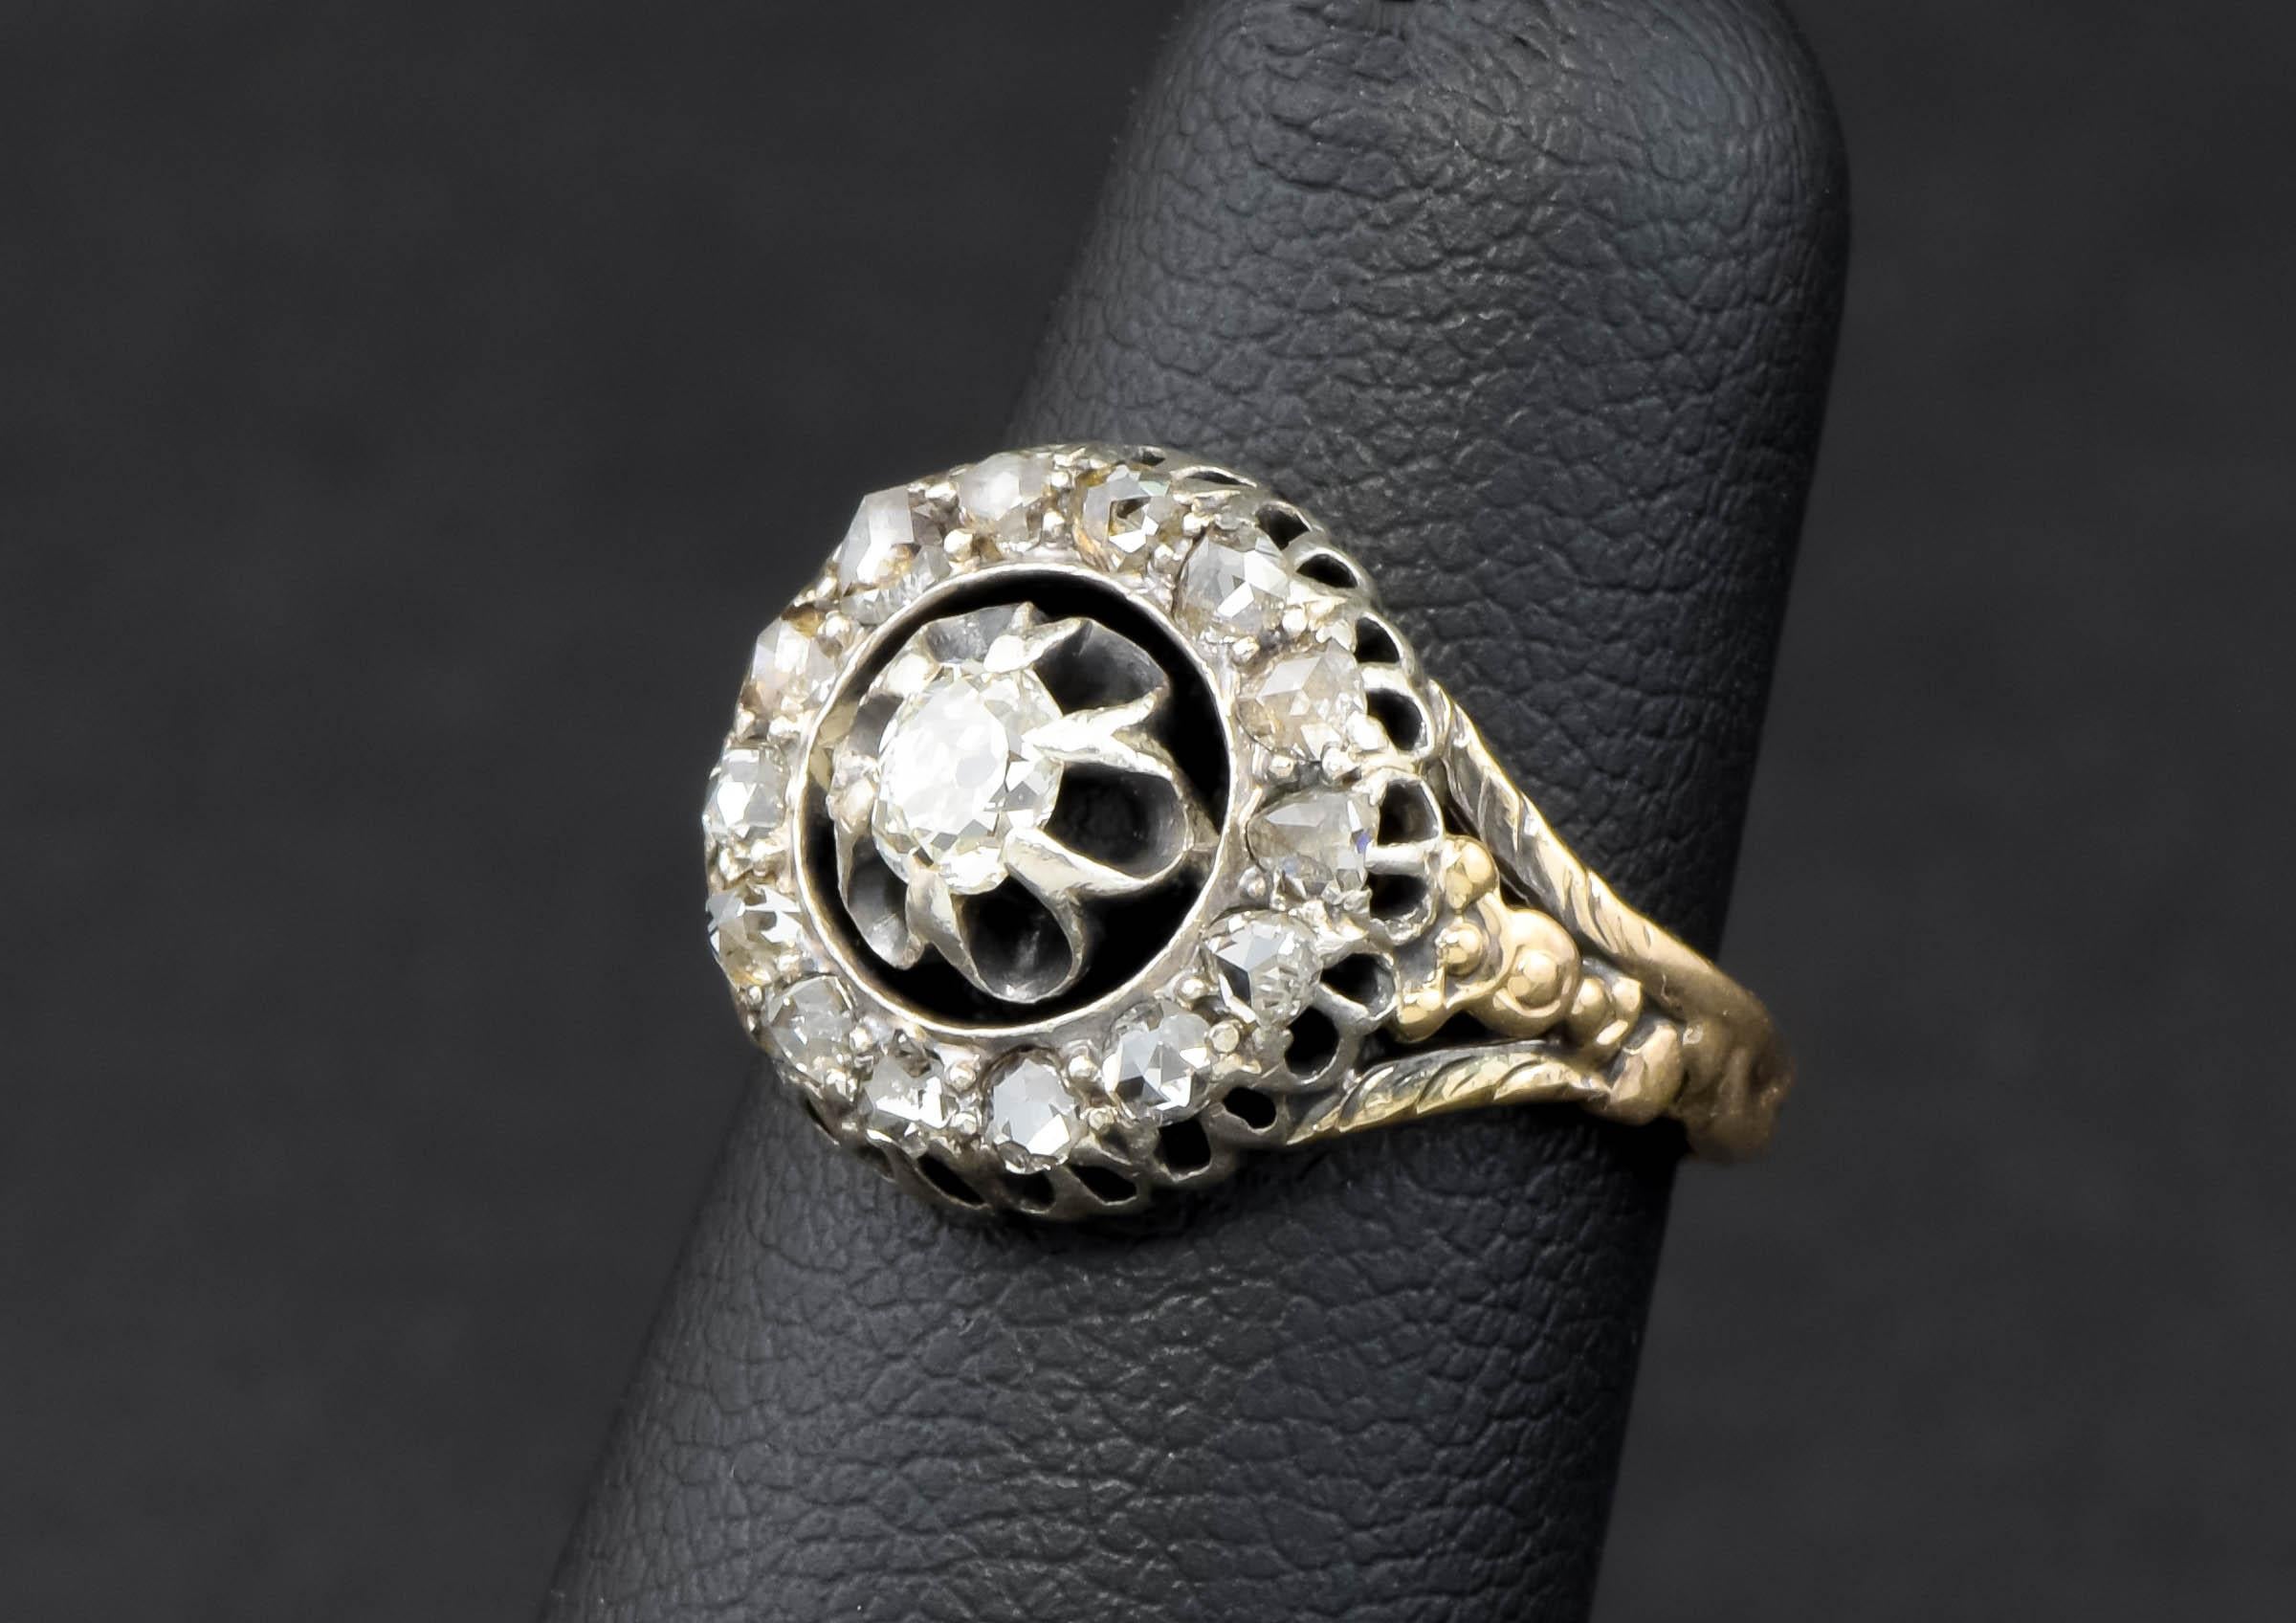 Early Victorian Diamond Halo Ring in 14K Gold & Silver - Old Mine and Rose Cut Diamonds with Box For Sale